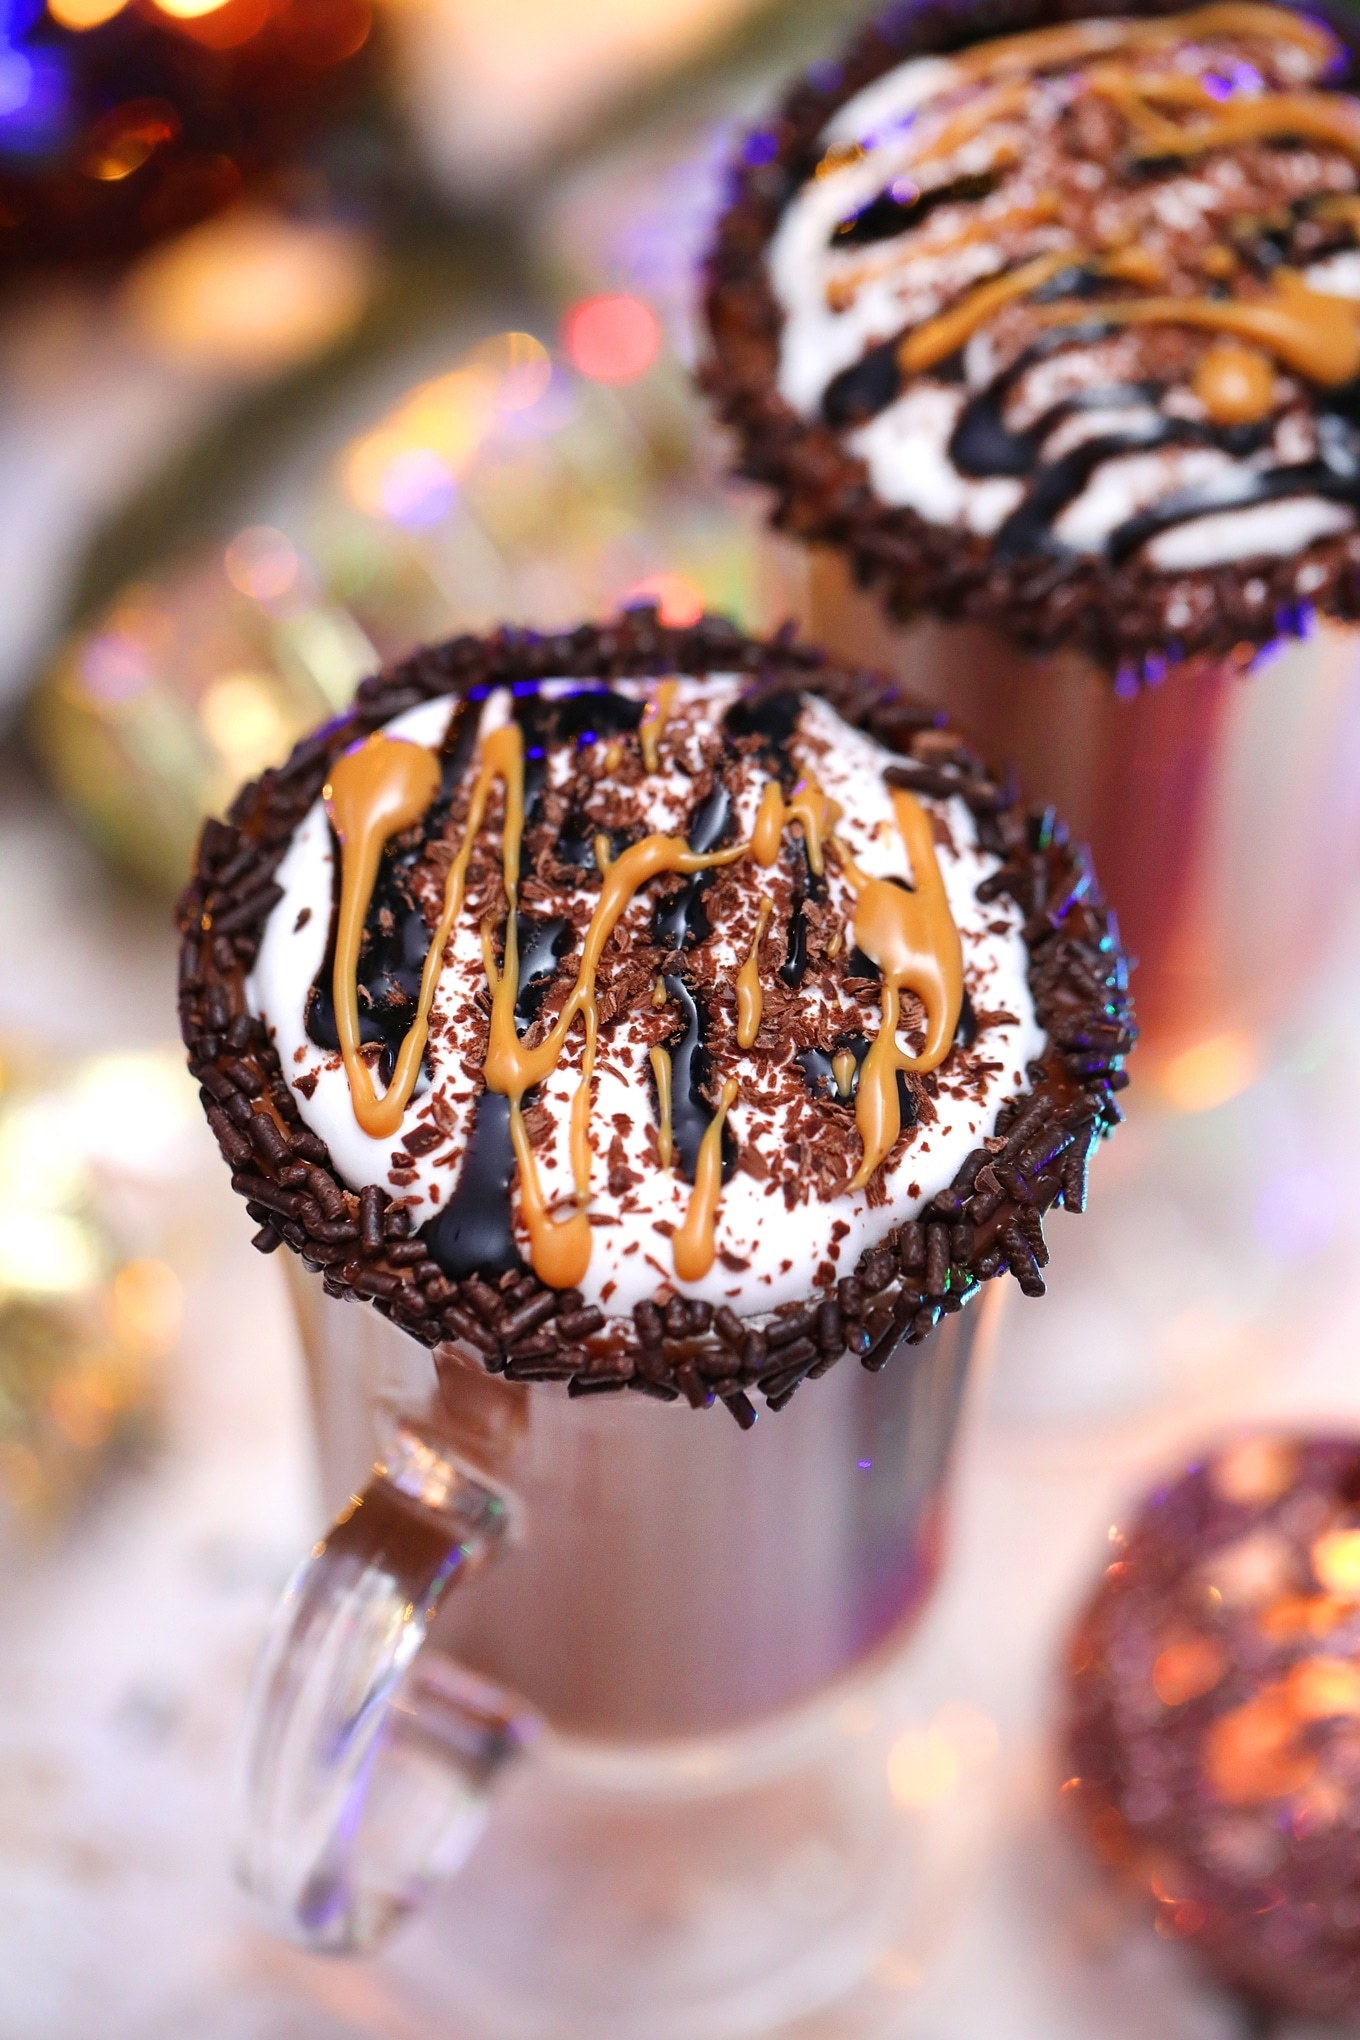 two cups of hot chocolate with peanut butter and chocolate drizzle